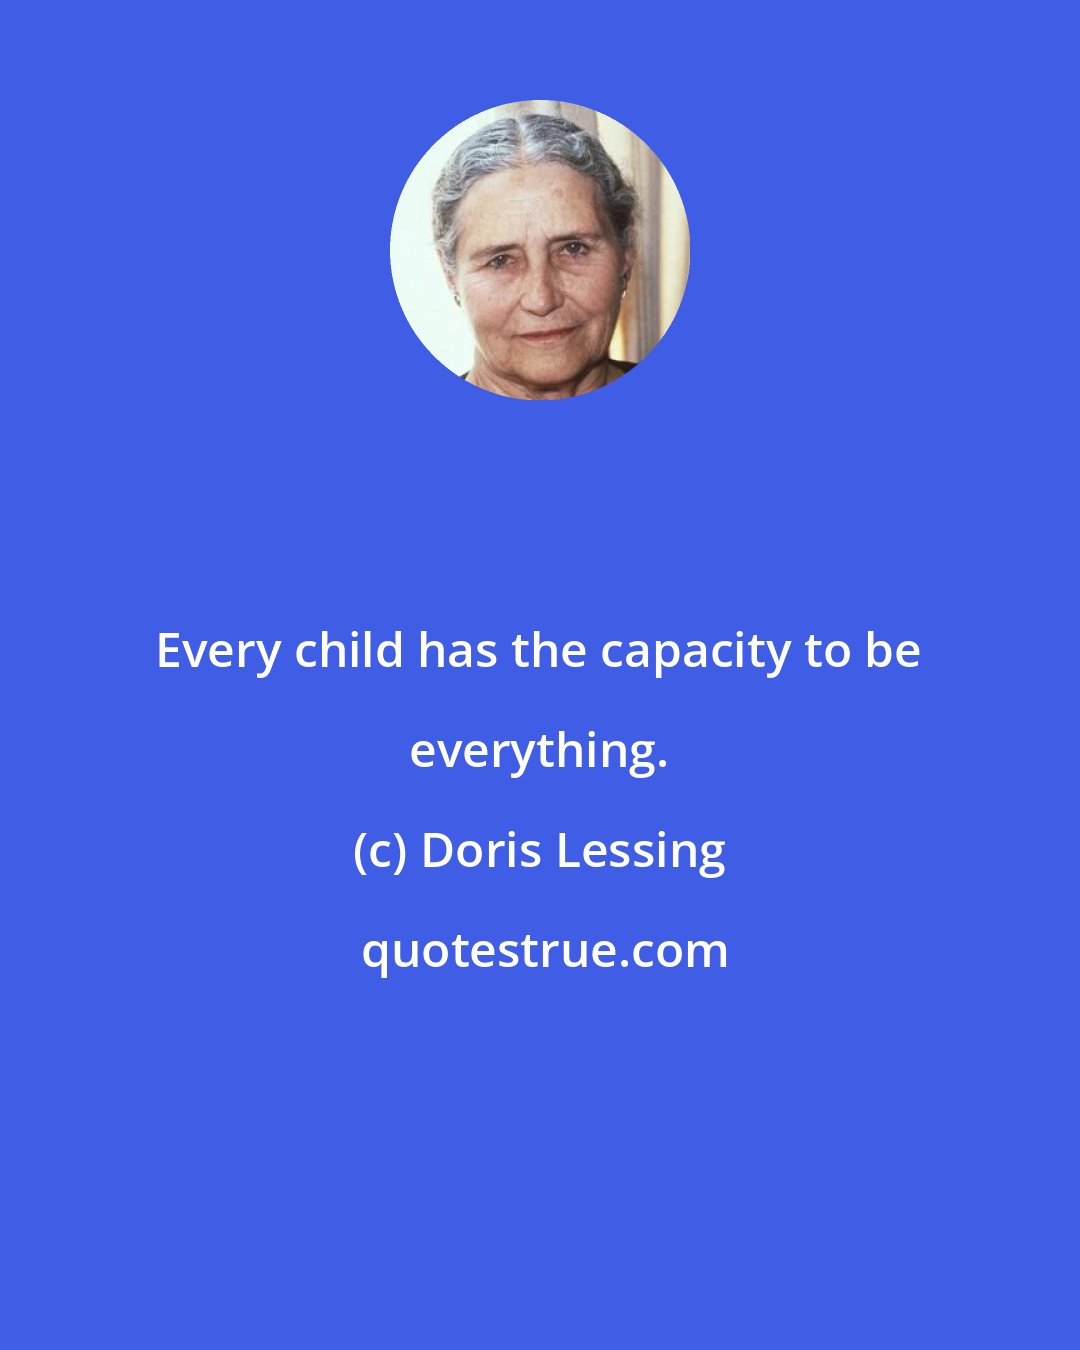 Doris Lessing: Every child has the capacity to be everything.